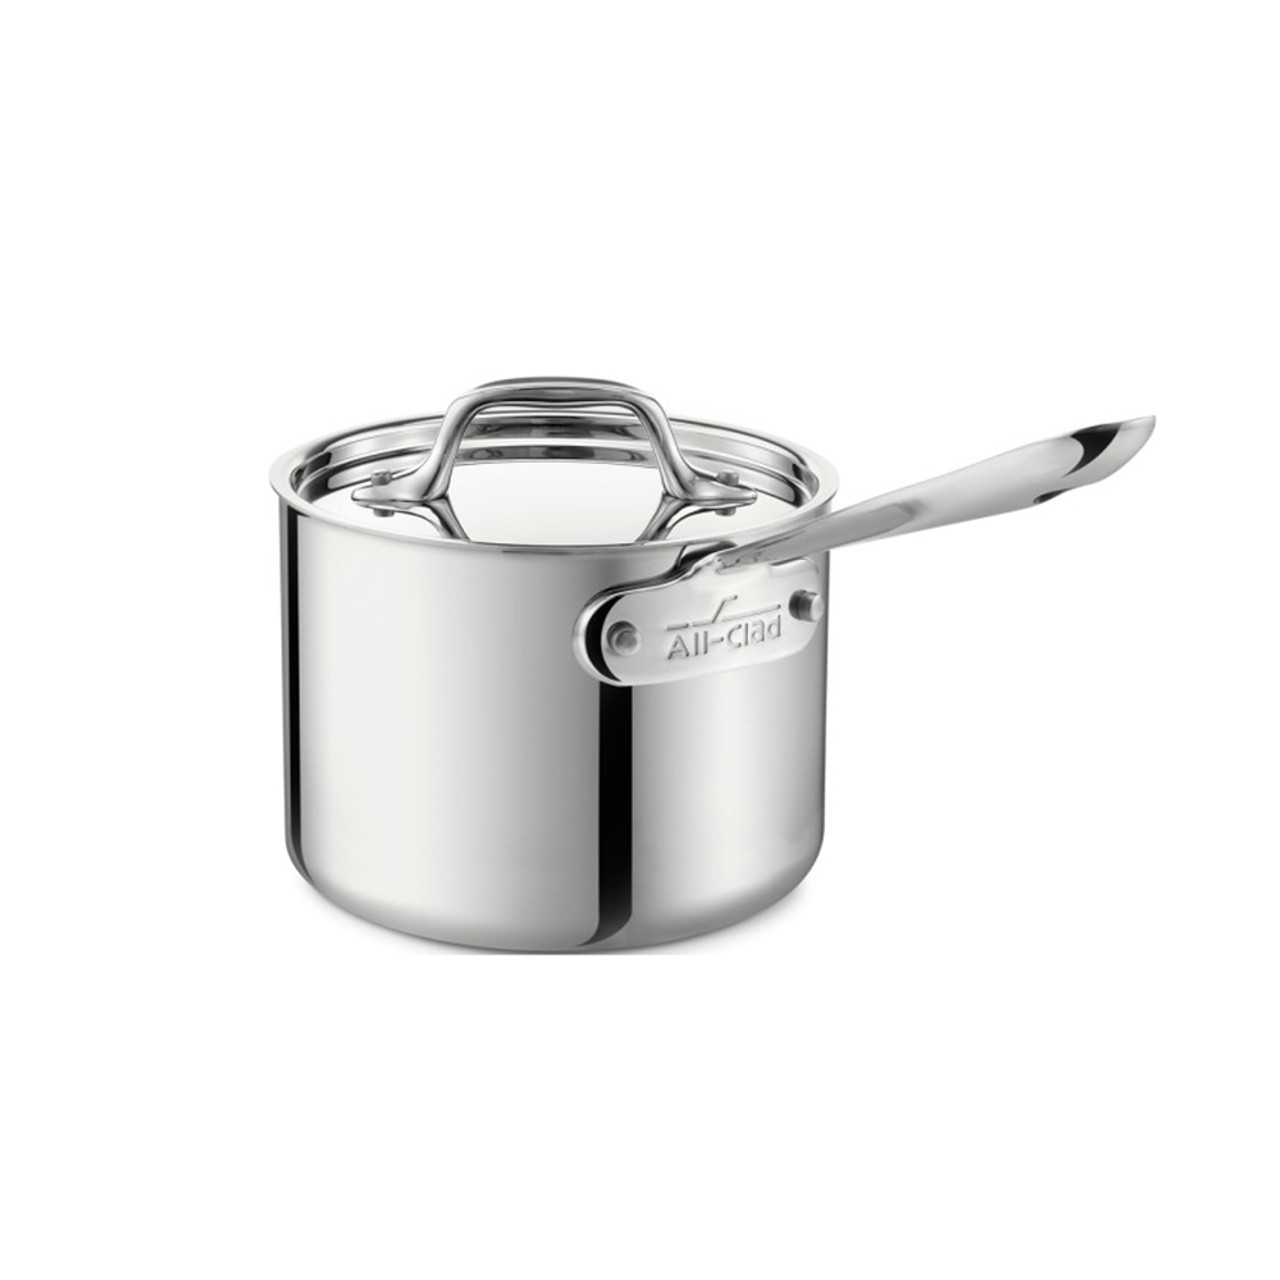 https://cdn11.bigcommerce.com/s-hccytny0od/images/stencil/1280x1280/products/498/1874/all-clad-stainless-steel-sauce-pan-1-5qt__18494.1657044664.jpg?c=2?imbypass=on